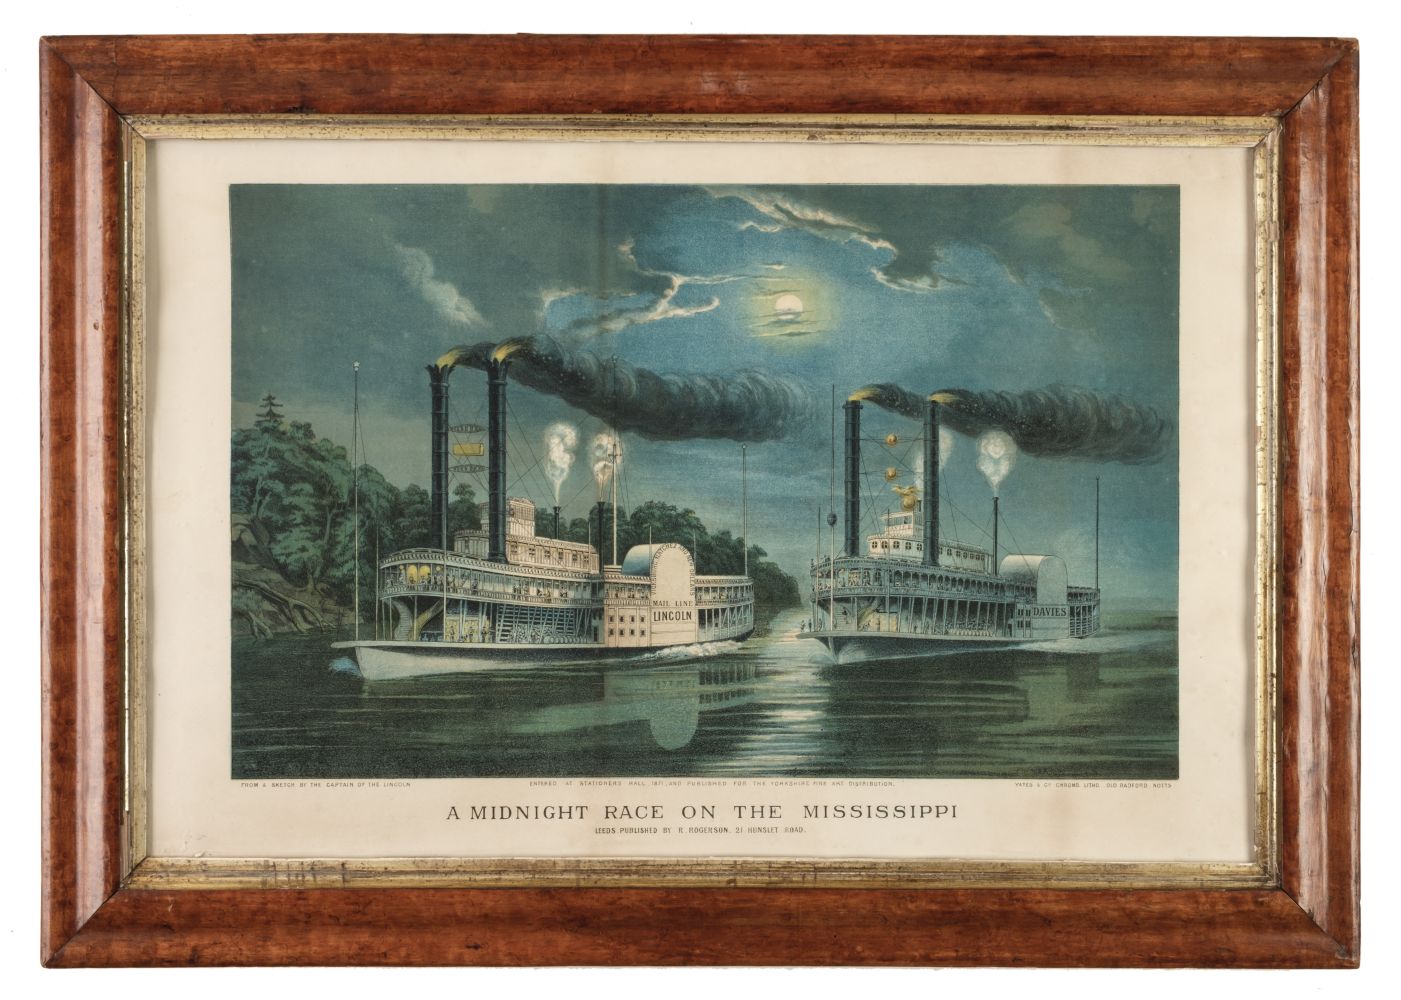 * Rogerson R., (publisher). A Midnight Race on the Mississippi, 1871